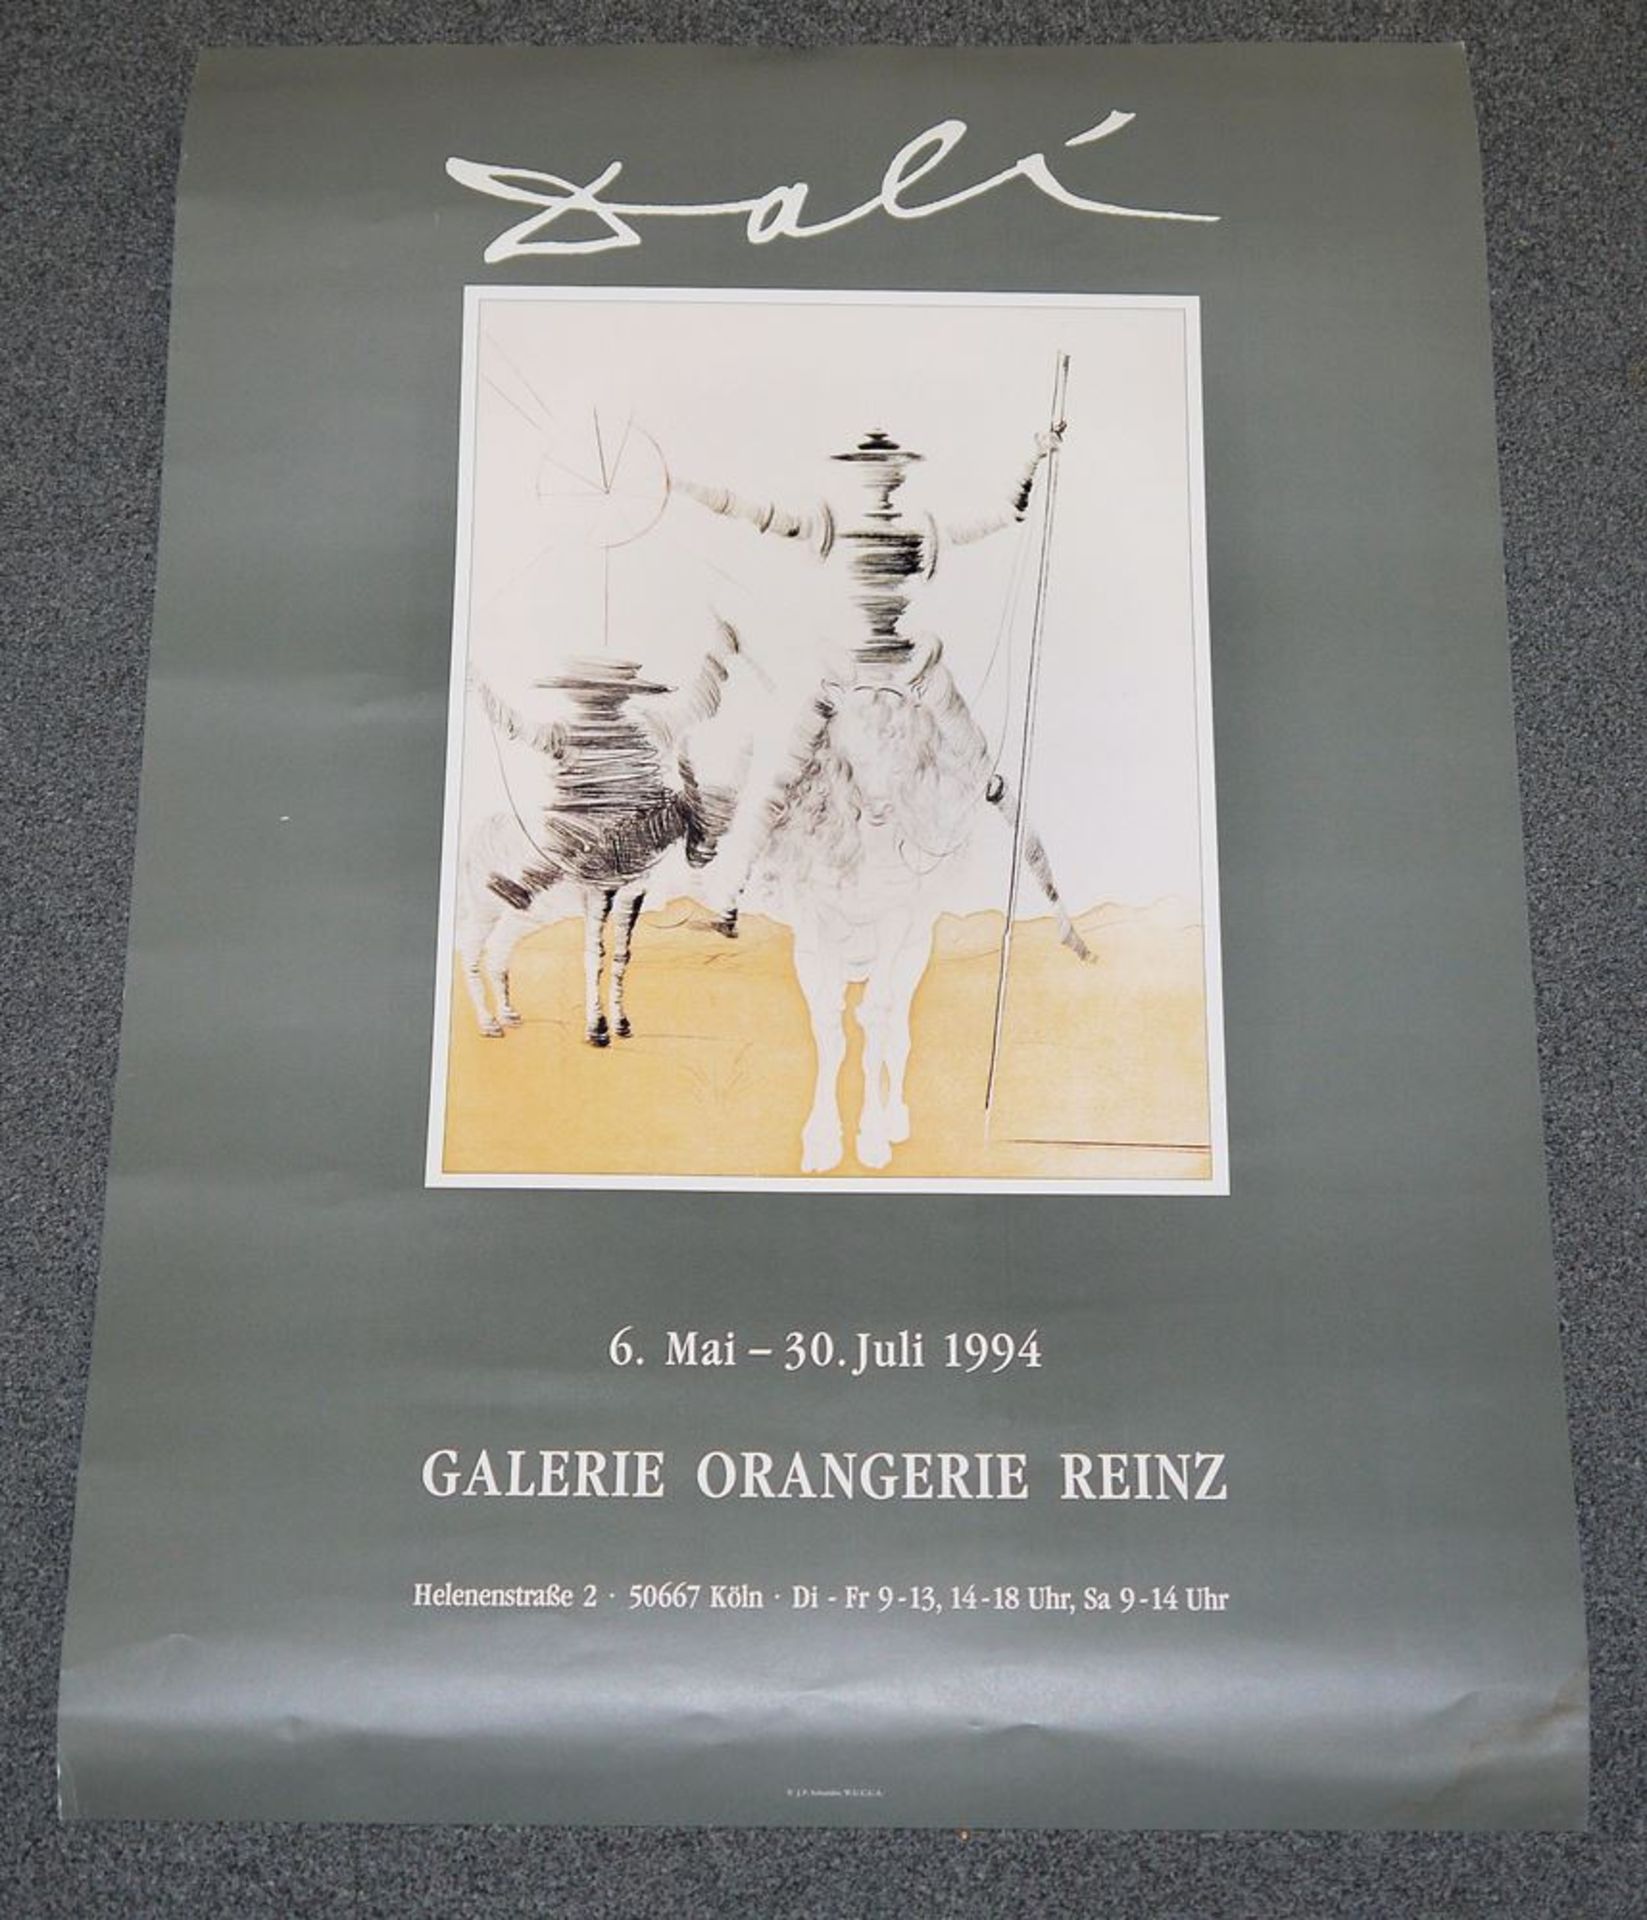 Salvador Dalí, Fine Subject Library with 23 vols & 2 große art photographs "Dali" by Norbert Linx - Image 3 of 3